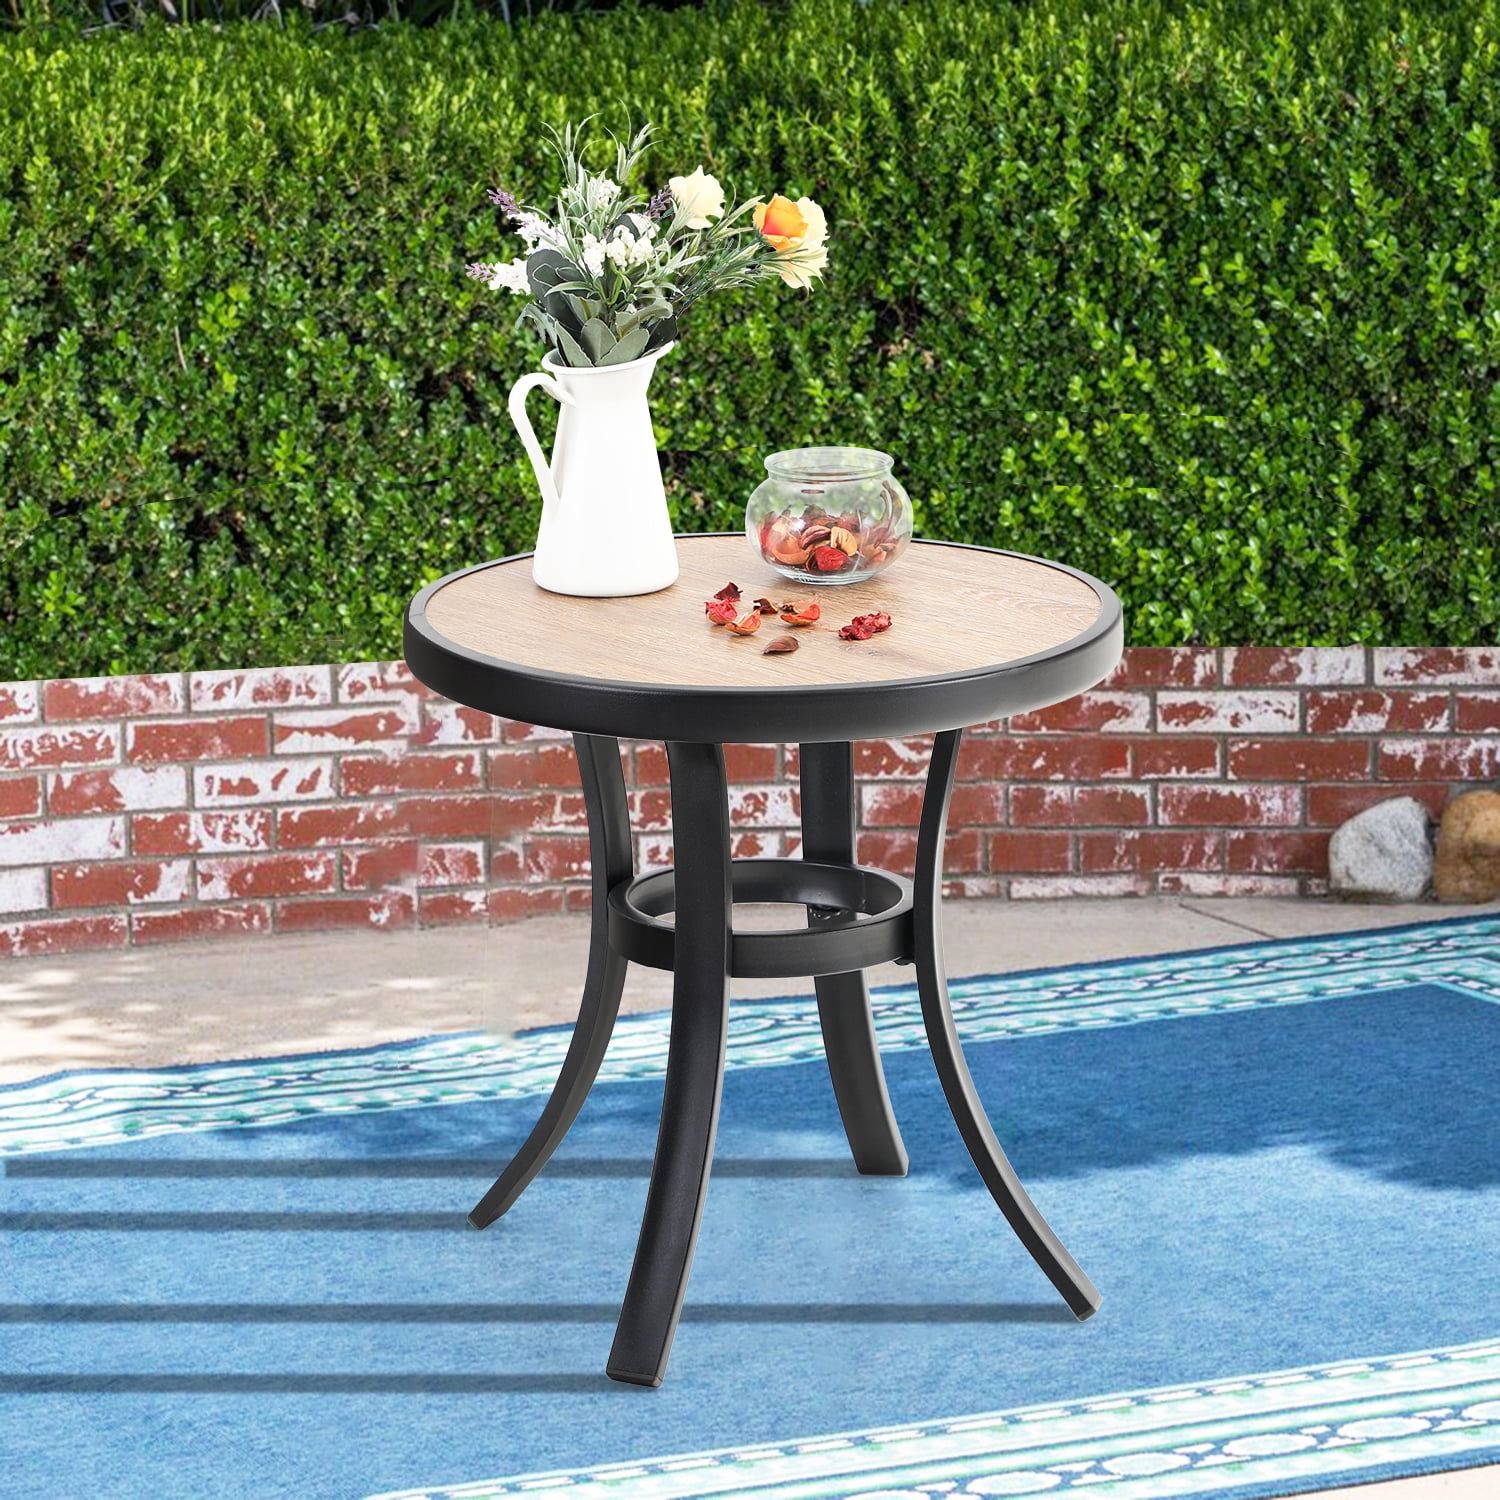 Mf Studio 19 Inches Bistro Side Table, Outdoor Coffee Table Wooden Like Regarding Outdoor Half Round Coffee Tables (View 6 of 20)